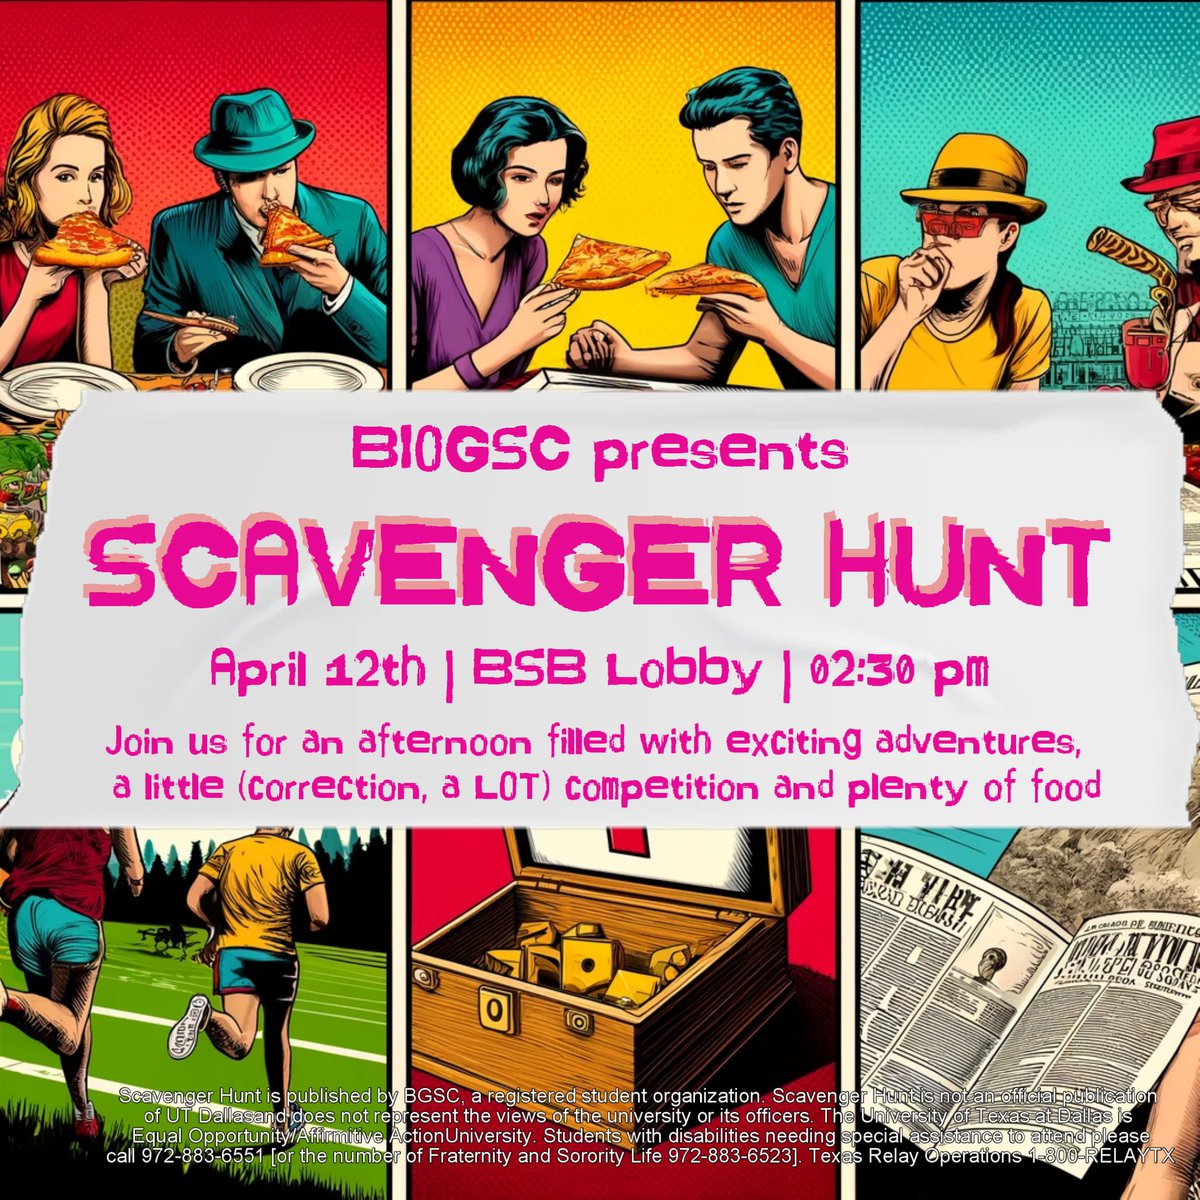 Guys, the Scavenger Hunt is TOMORROW. I repeat, TOMORROW at 2:30 pm in BSB lobby. If y'all haven't already signed up, the link is up in the Biological Sciences GSC Teams channel. (P.S. Bring a map)